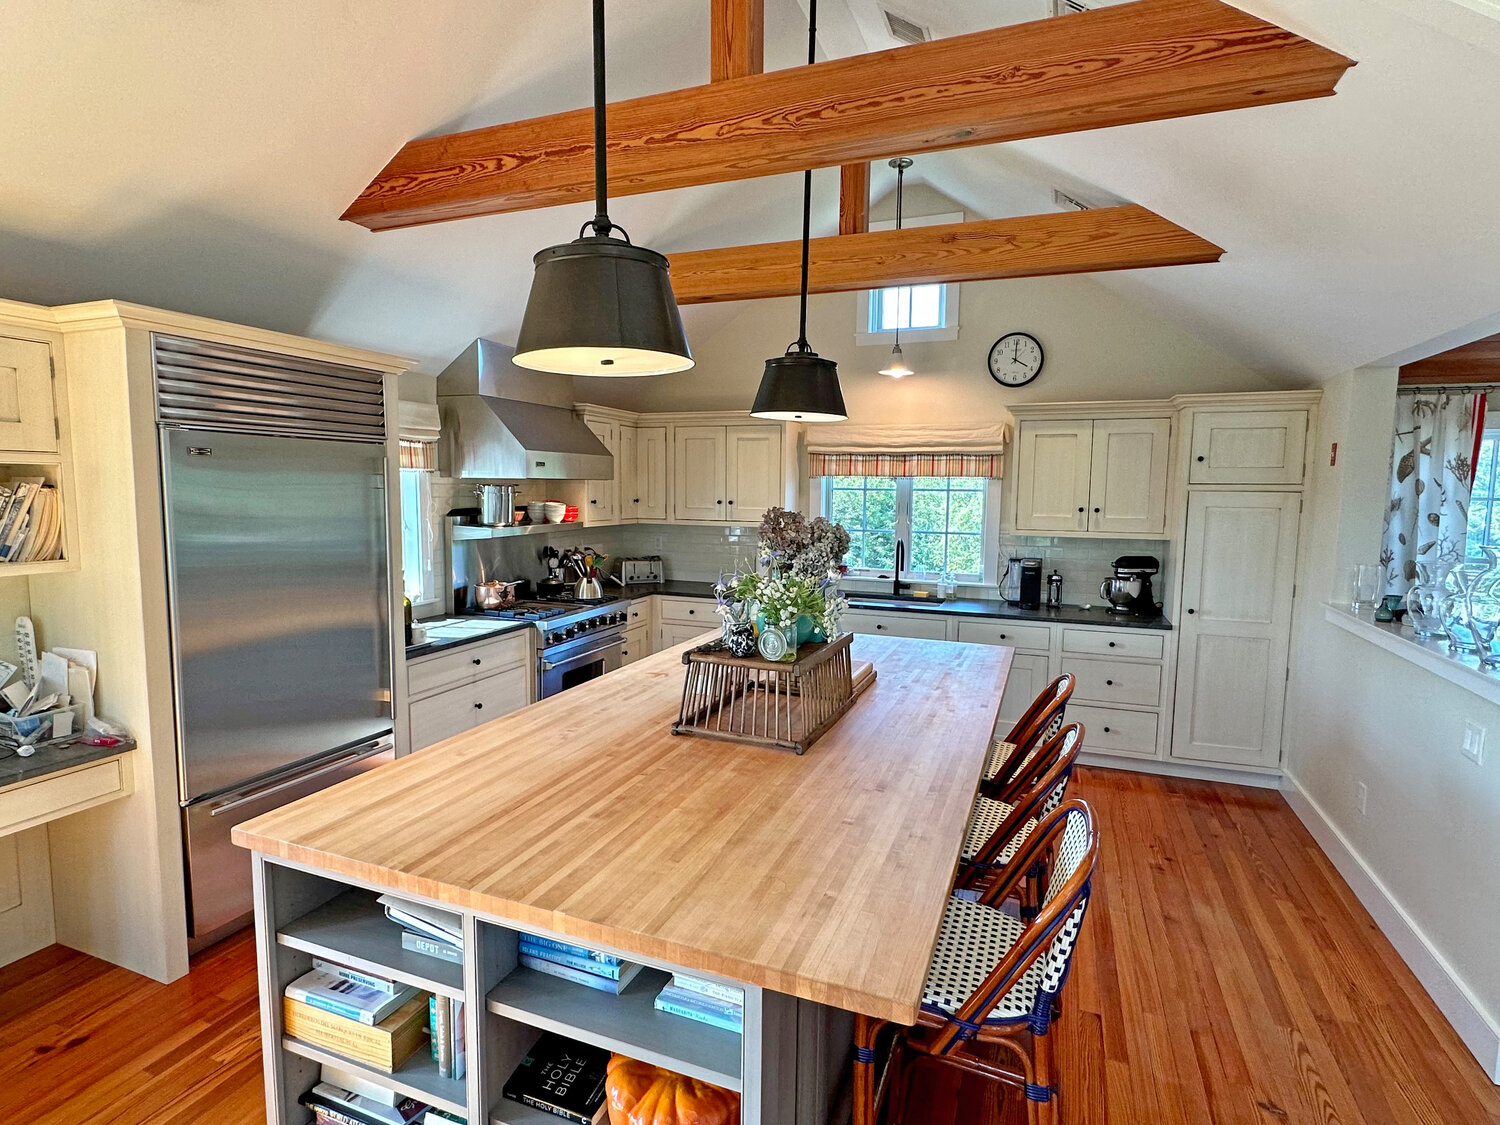 The gourmet kitchen has a large butcher-block center island and high-end appliances from Viking, Sub-Zero and Bosch.